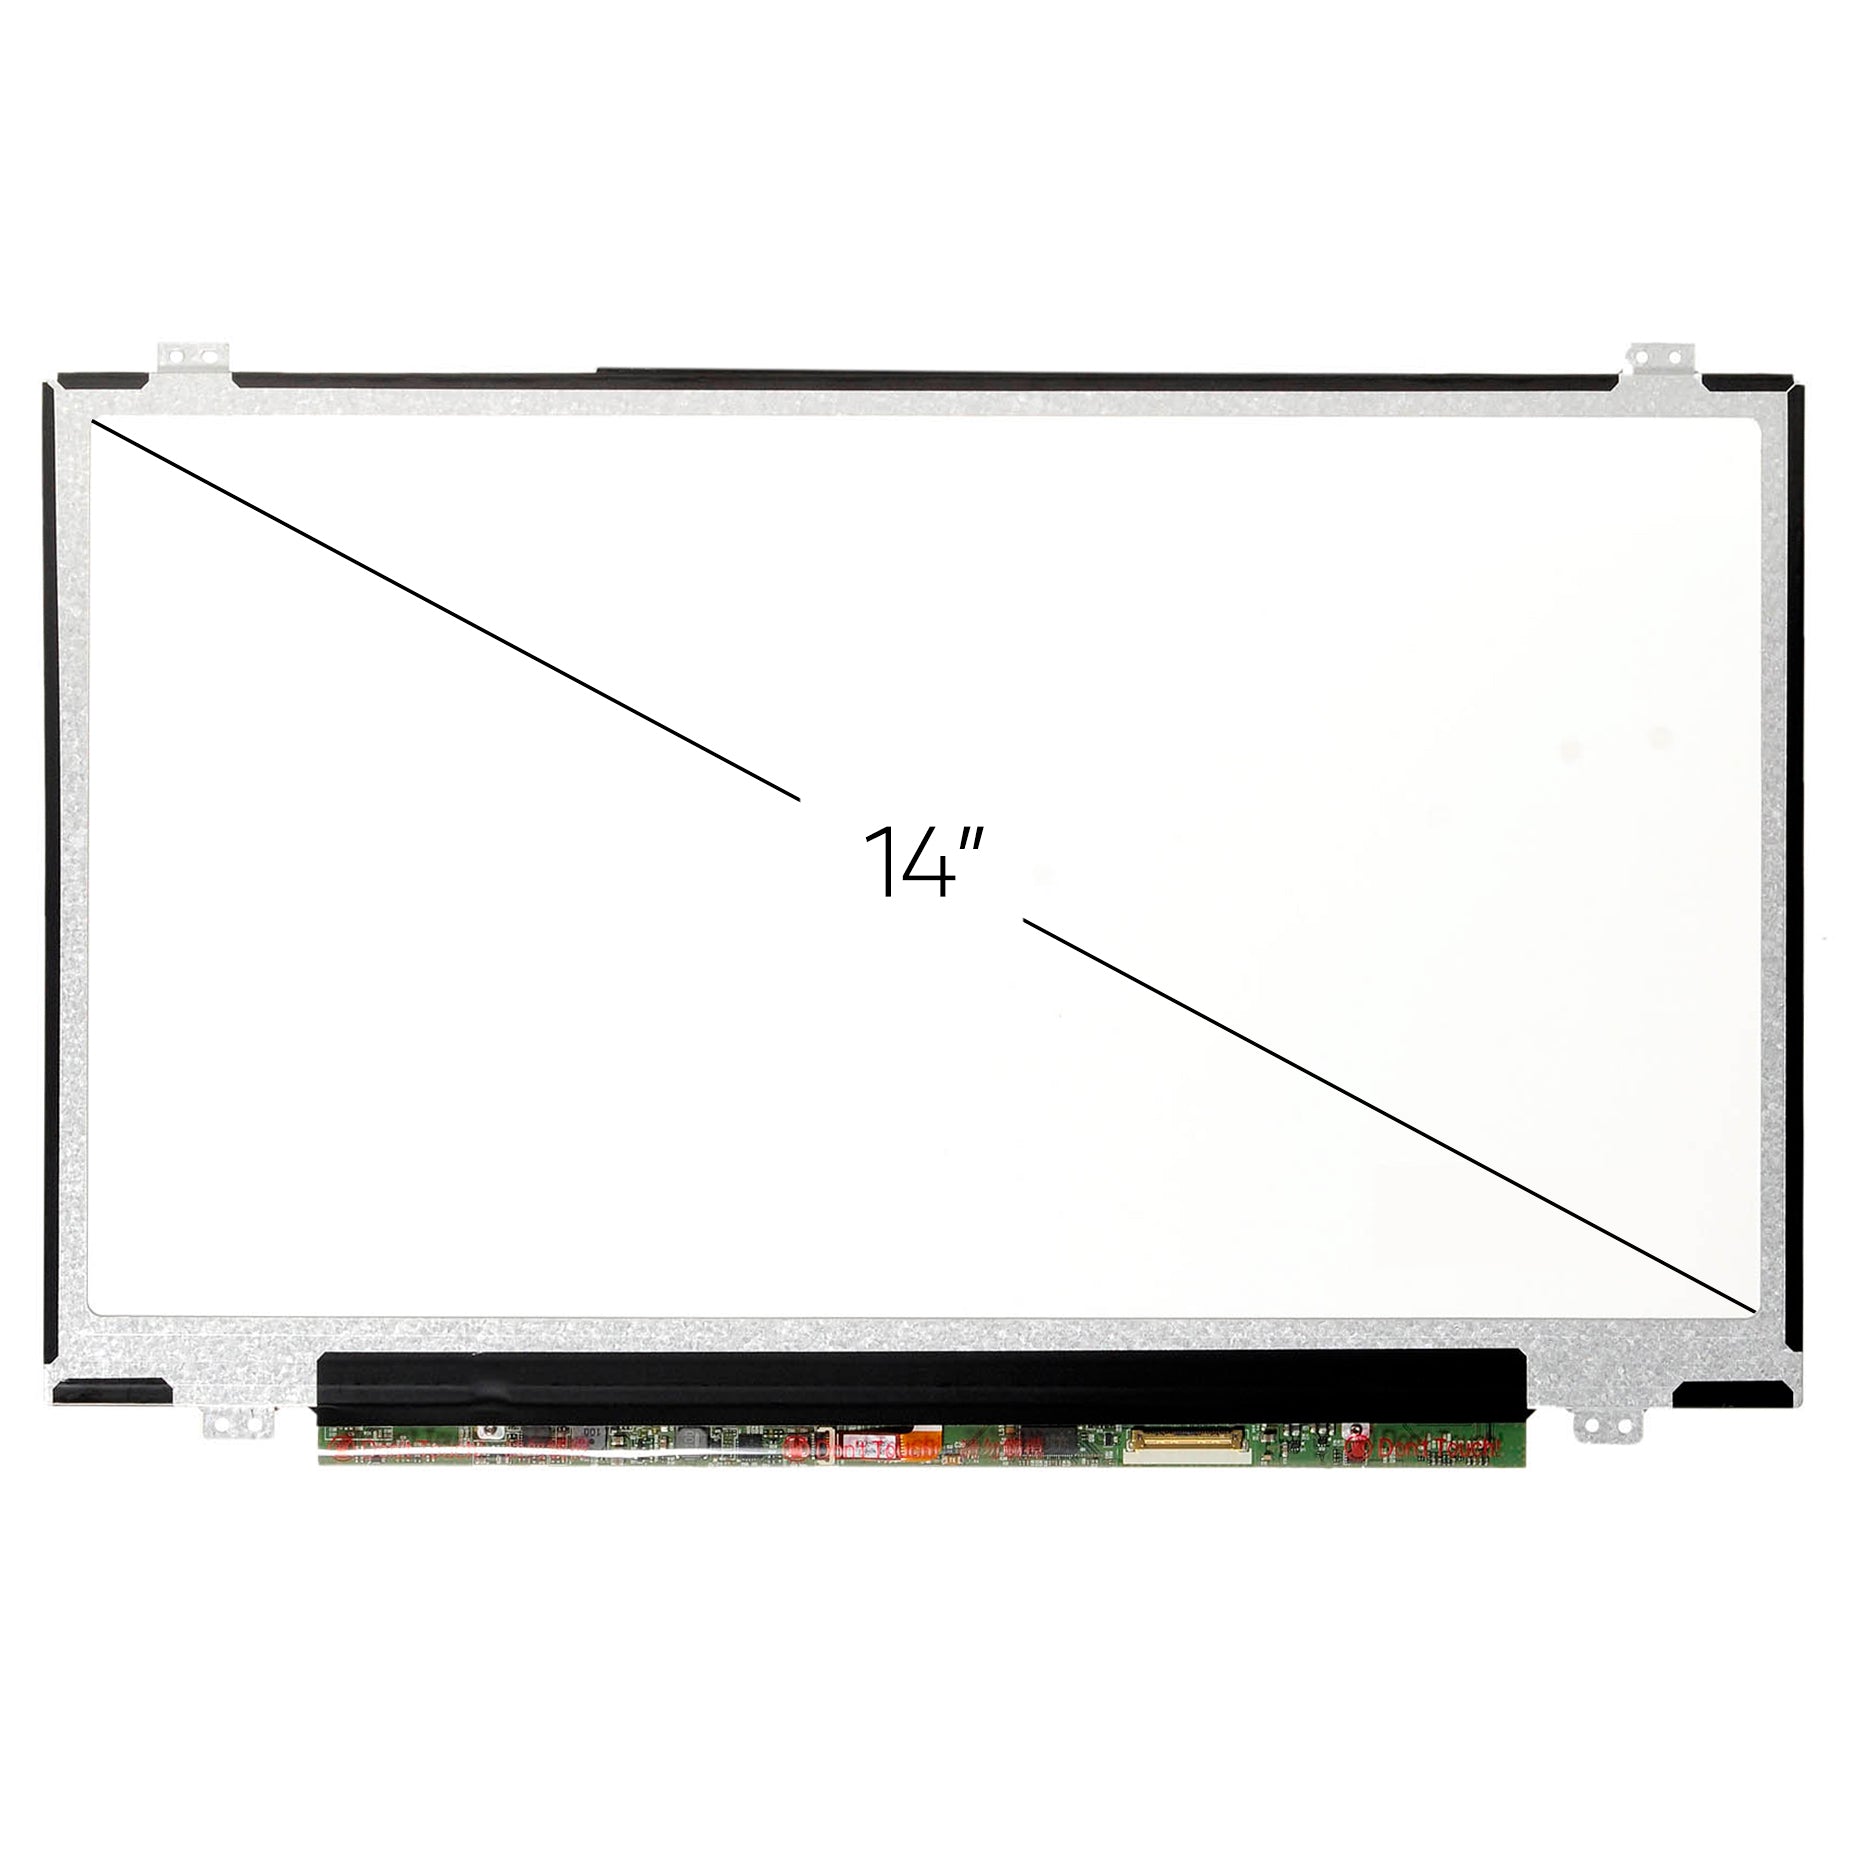 Screen Replacement for Lenovo Thinkpad L450 FHD 1920x1080 IPS Matte LCD LED Display